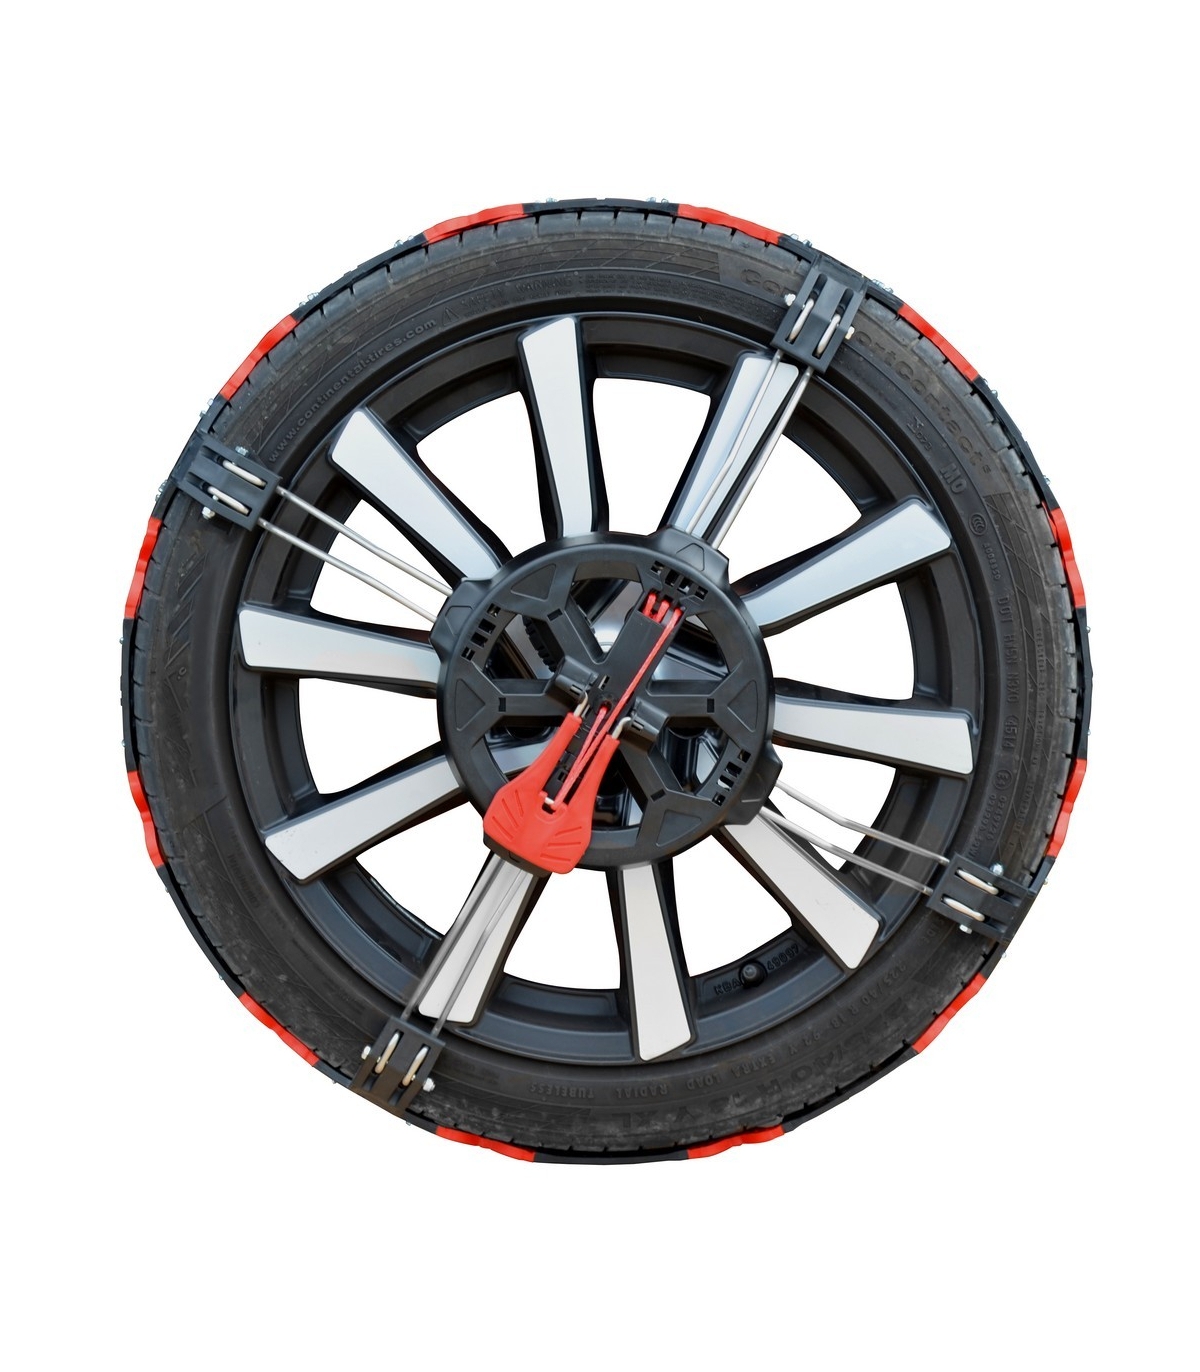 Chaine neige vehicule non chainable POLAIRE GRIP 255/35R19 225/45R18 205/ 55R17